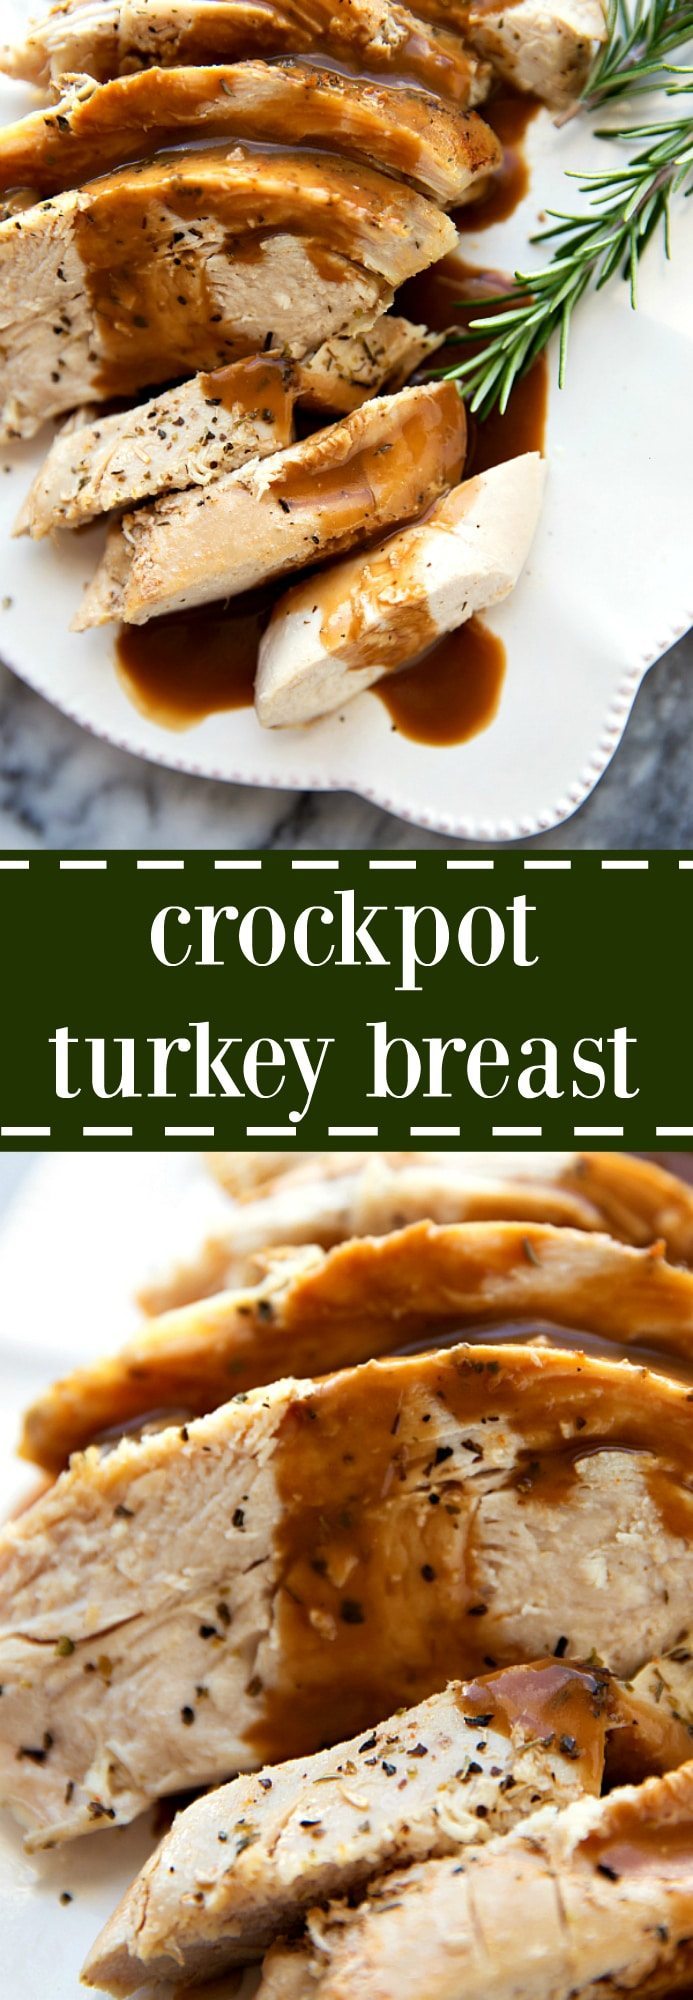 What is a recipe for cooking turkey in a Crock-Pot?